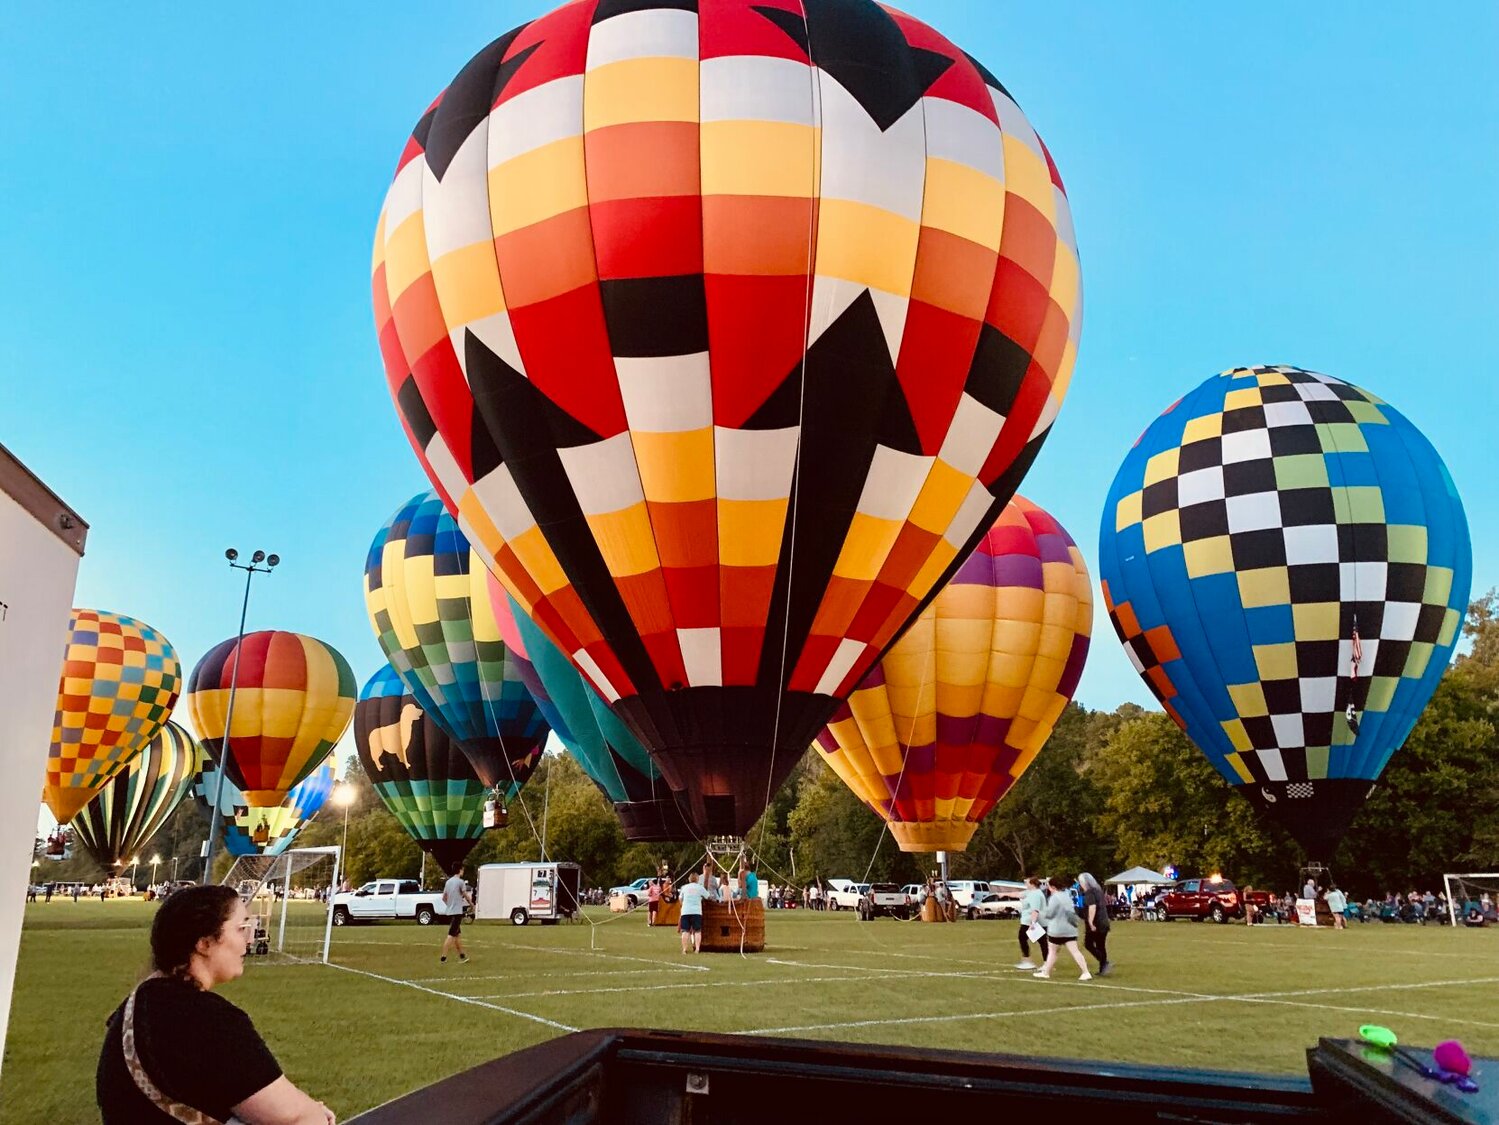 The 13 balloons at this years’ Annual Arkansas Hot Air Balloon Championship were able to fly at all four scheduled times, as well as the Balloon Glow. CONTRIBUTED PHOTO/LEE H. DUNLAP